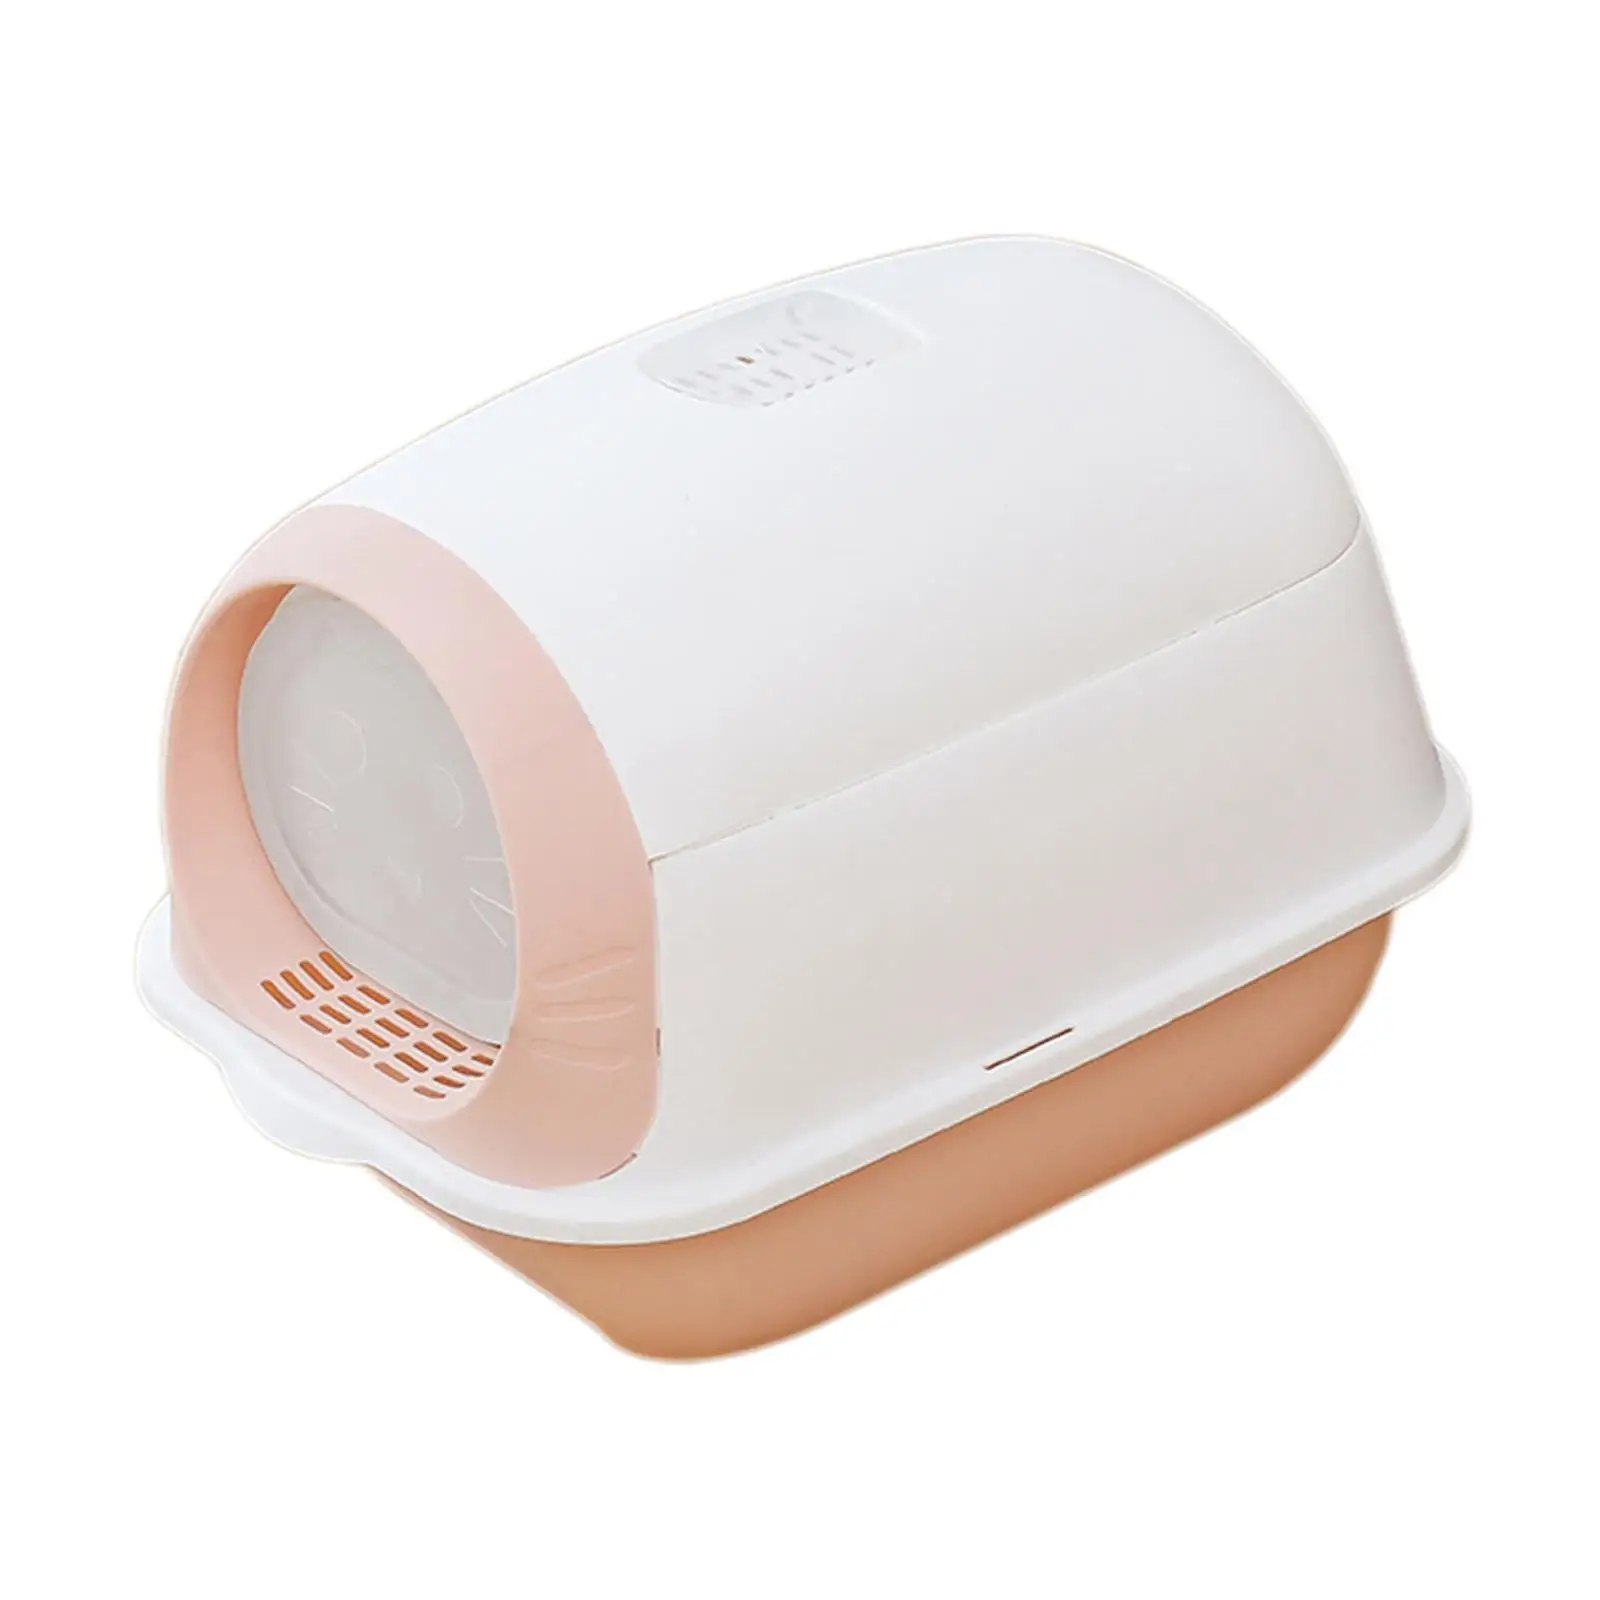 Hooded Cat Litter Box Enclosed Potty Toilet Deep Loo Container Pet Litter Tray for Rabbit